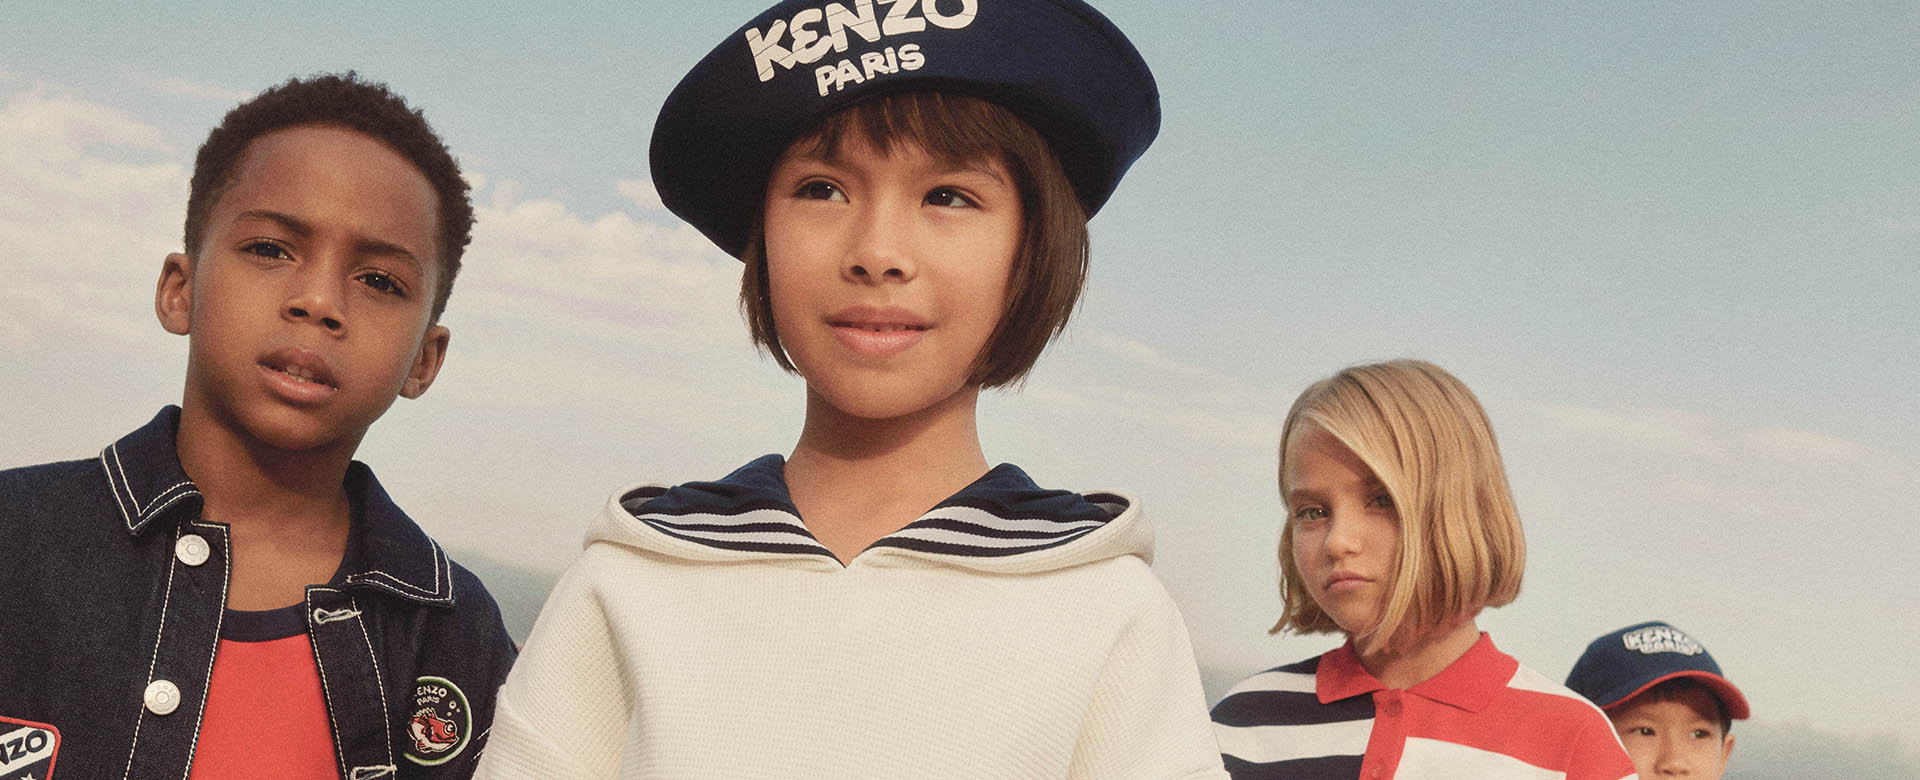 Children's outfits for boys and girls by Kenzo